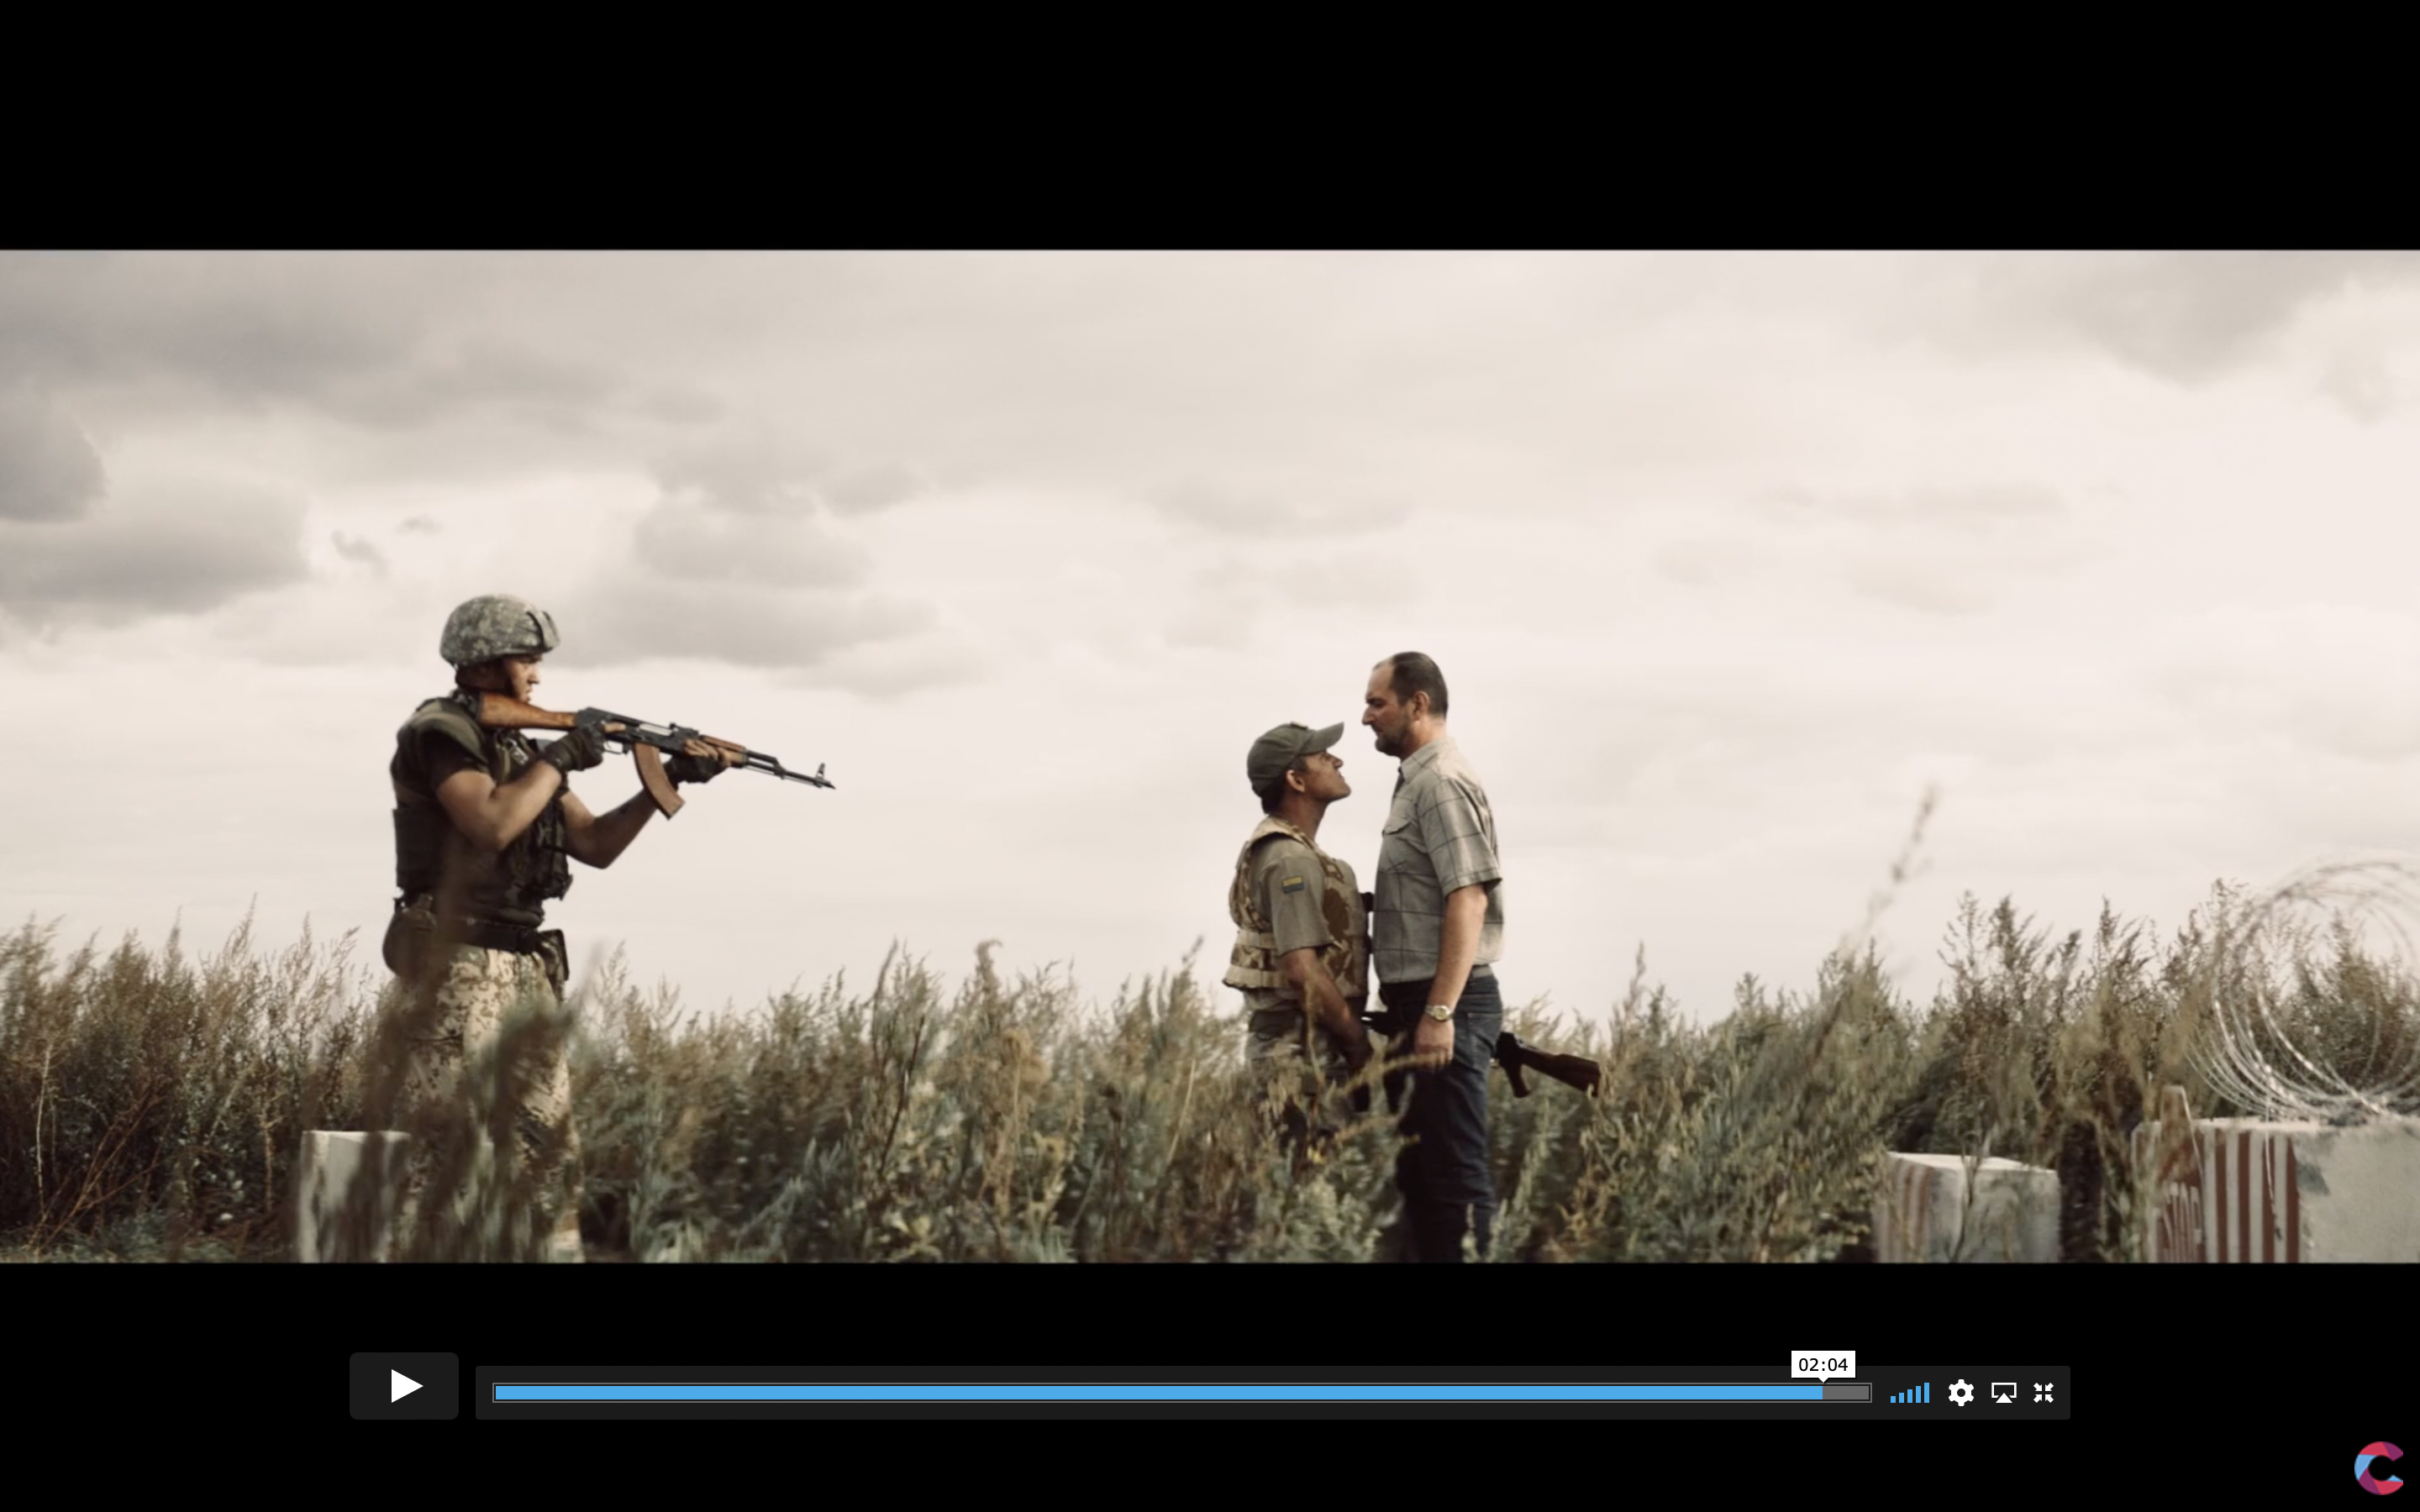 What’s going on in Ukraine? Watch these films to understand Russia’s ongoing war